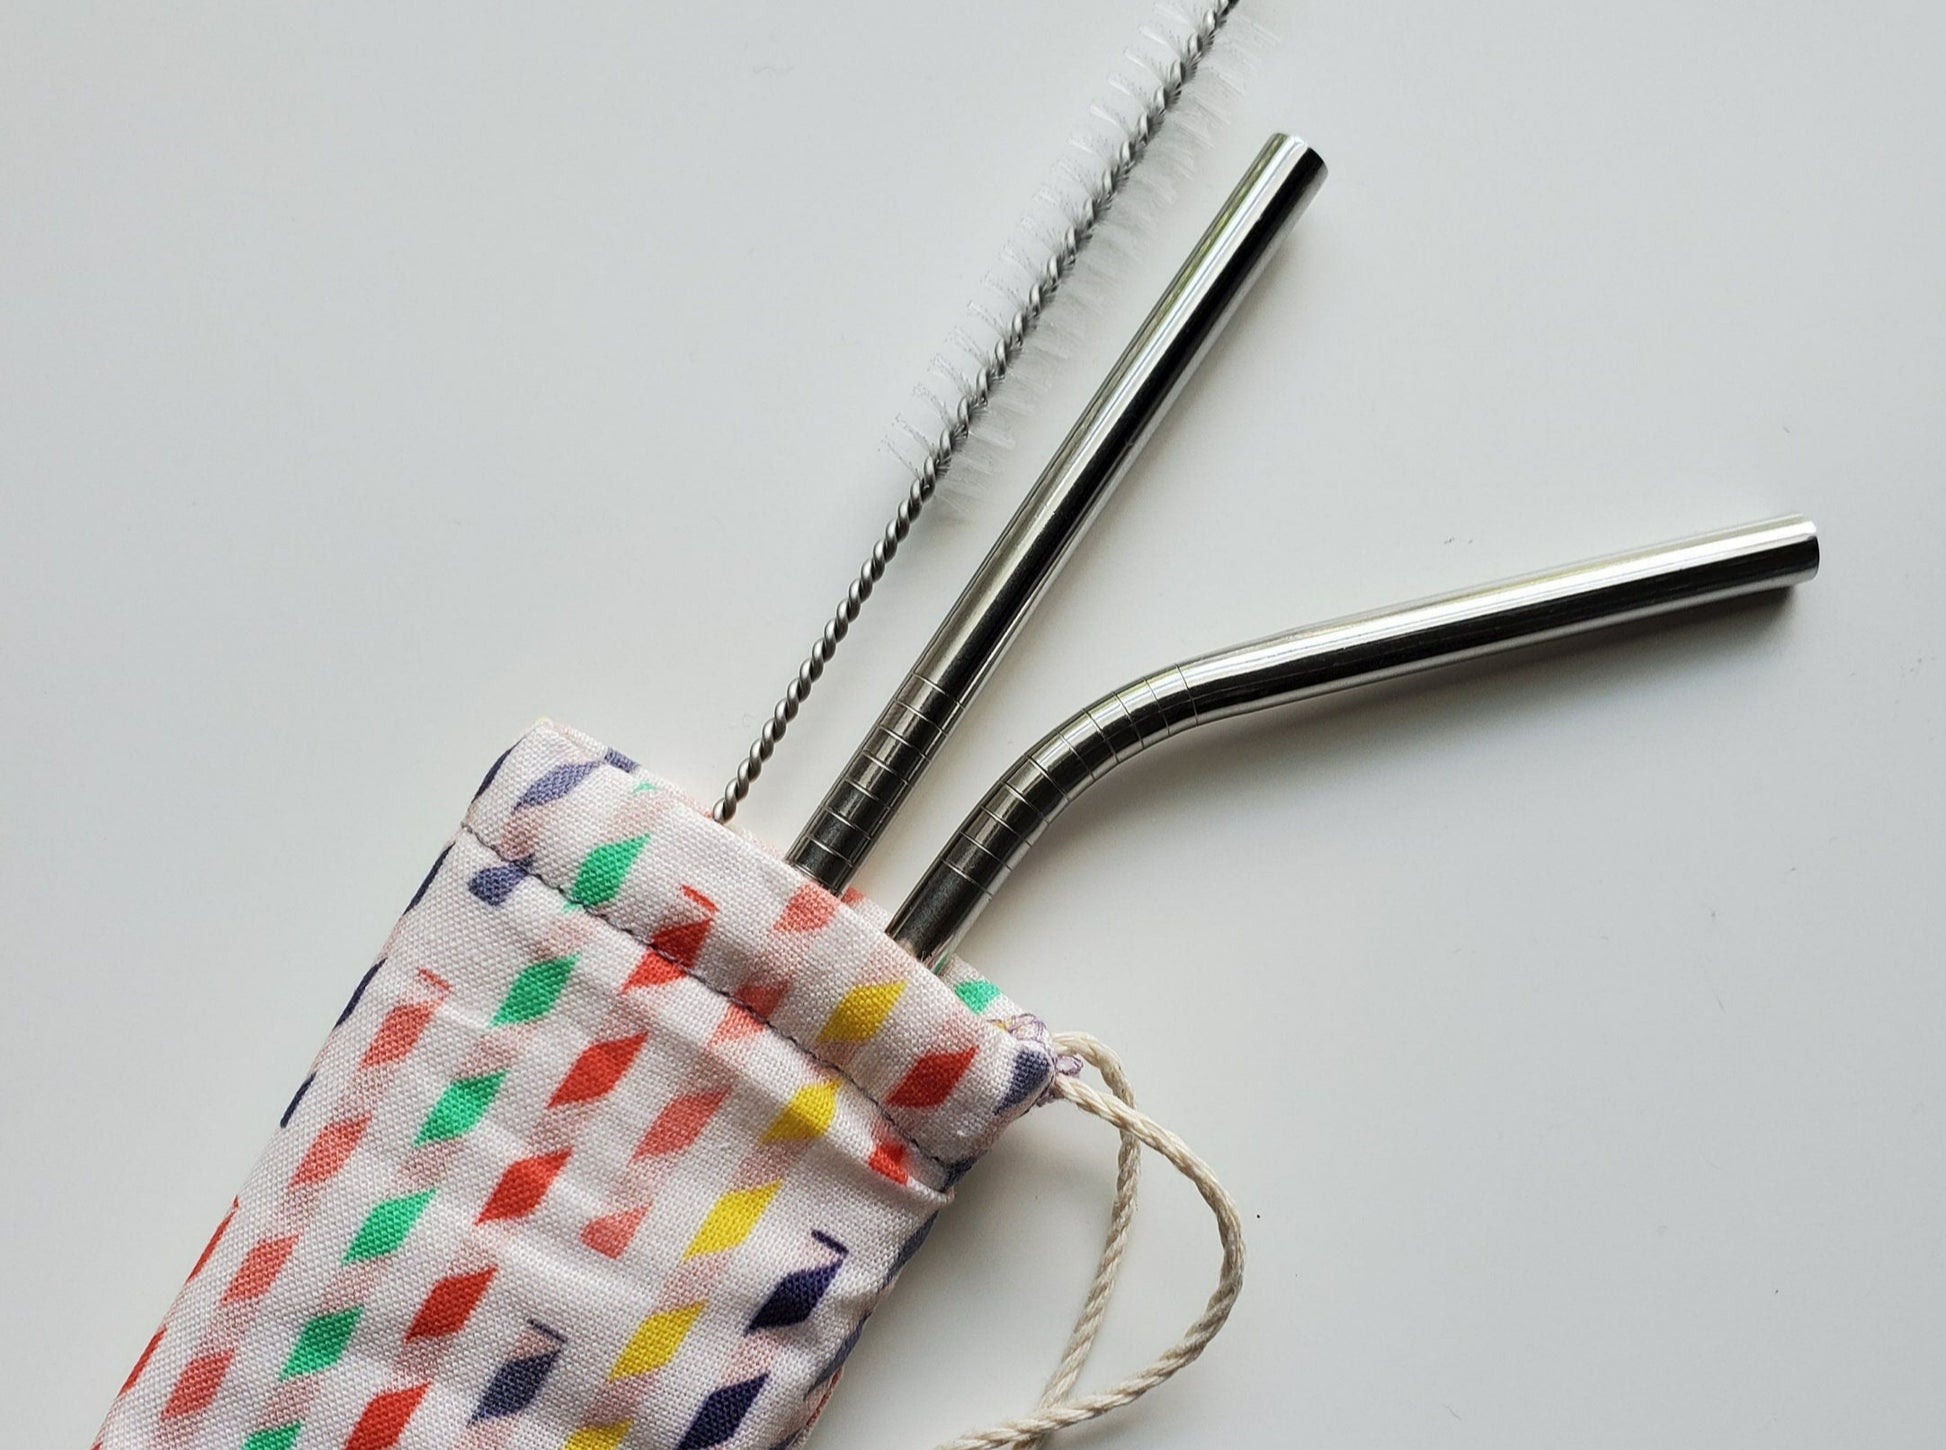 Reusable straw pouch with stainless steel straws sticking out the top. The fabric of the pouch is white with multicolored paper straws printed on, and it has a drawstring closure.